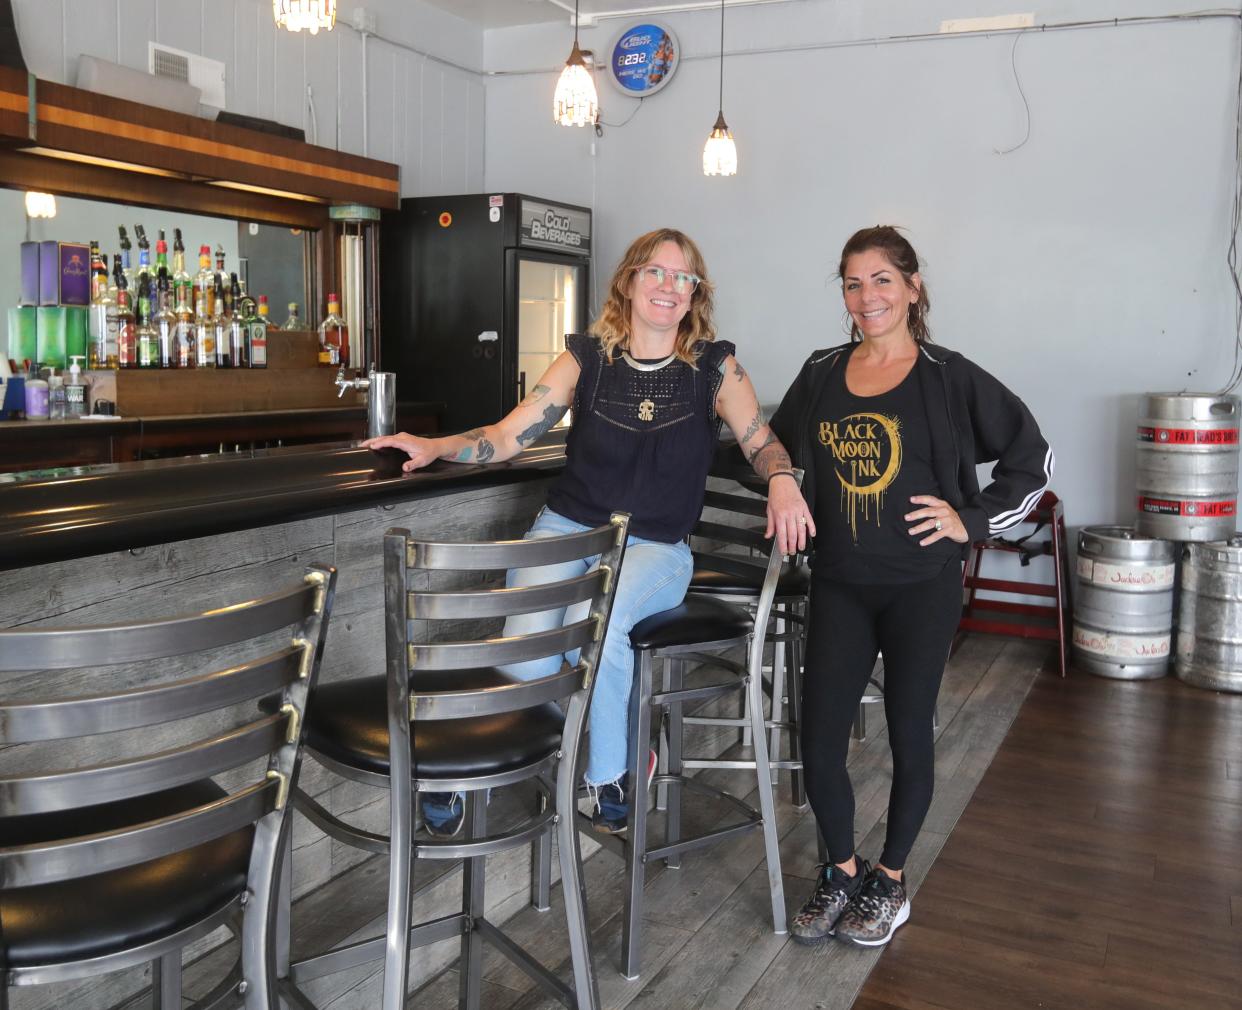 Manager Rachel Jernigan, left, and new owner Laura Grguric stand inside the former Silver Swan on Front Street that will be reopened as Ryes and Shine this sumer in Cuyahoga Falls.